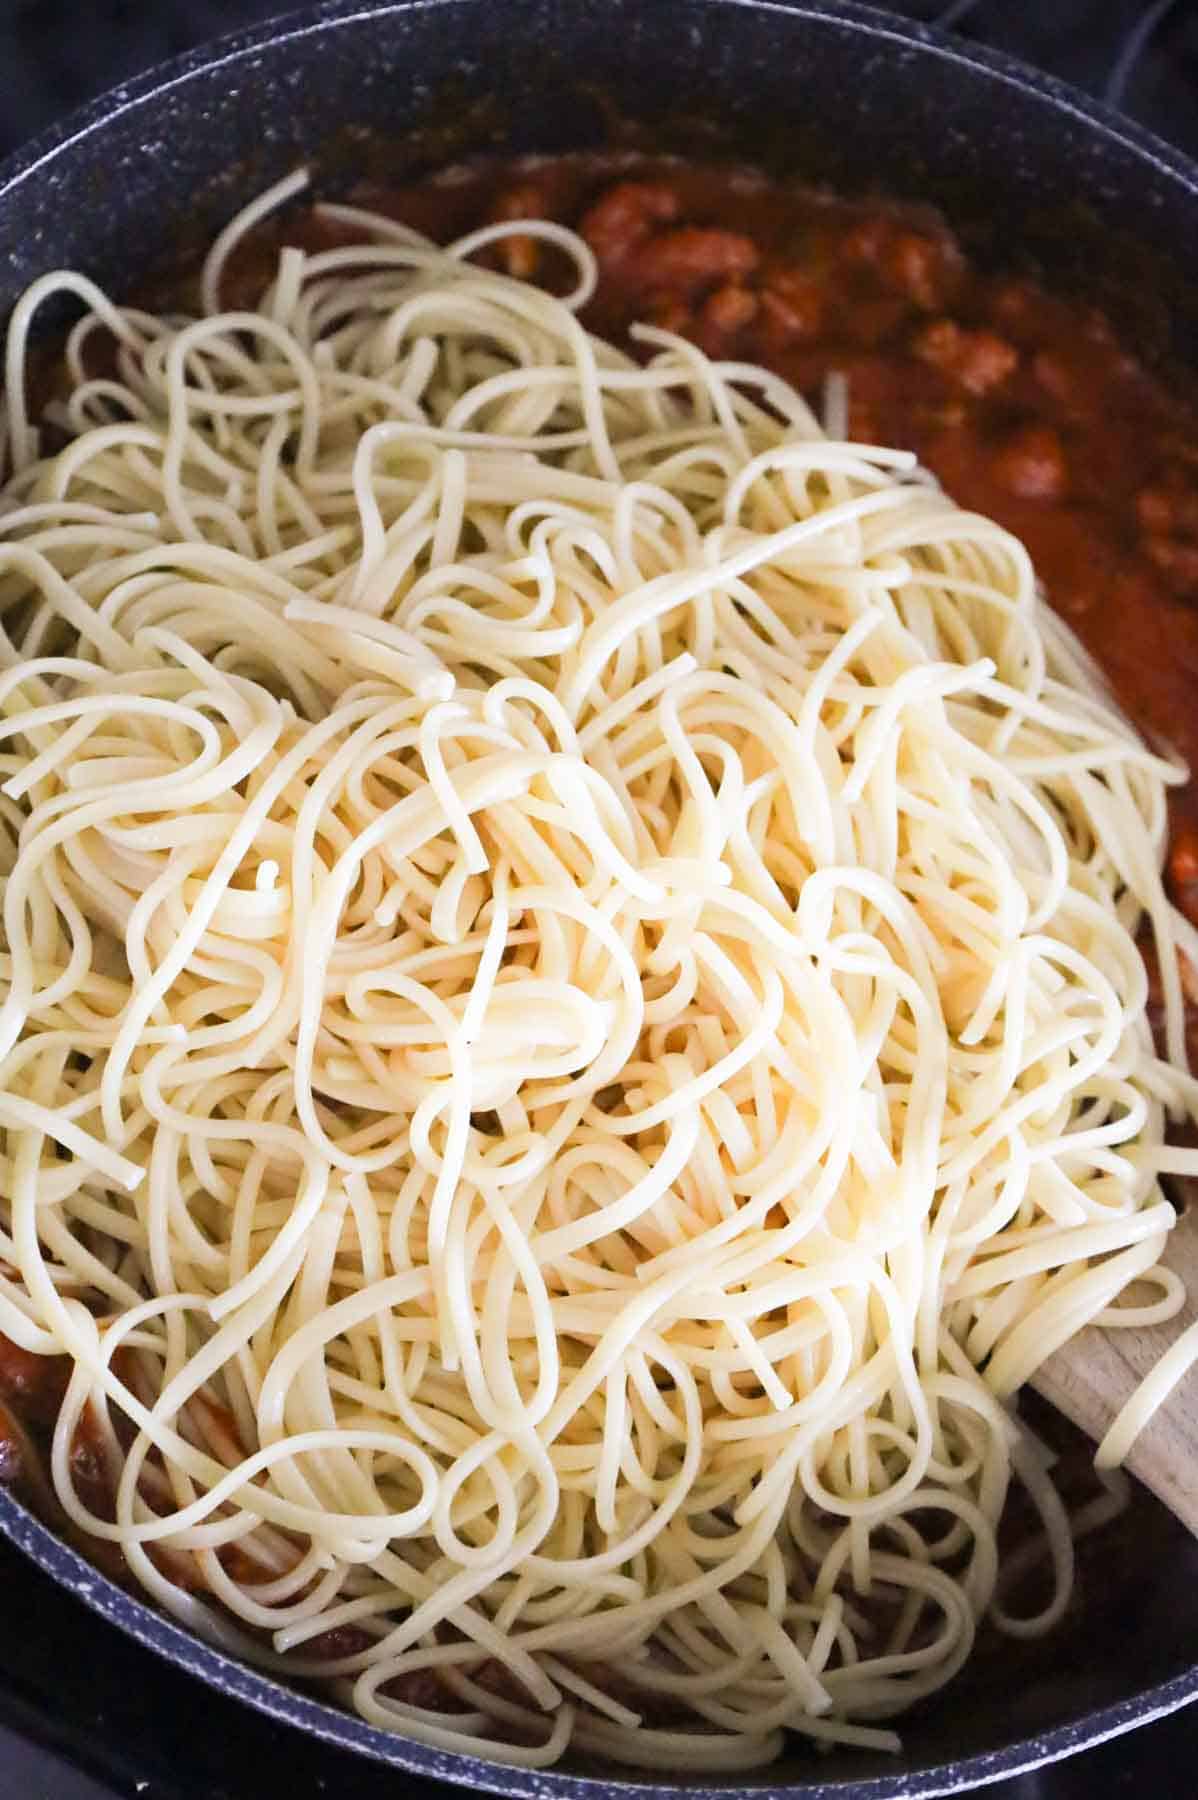 cooked spaghetti noodles added to skillet with sauce and meat mixture